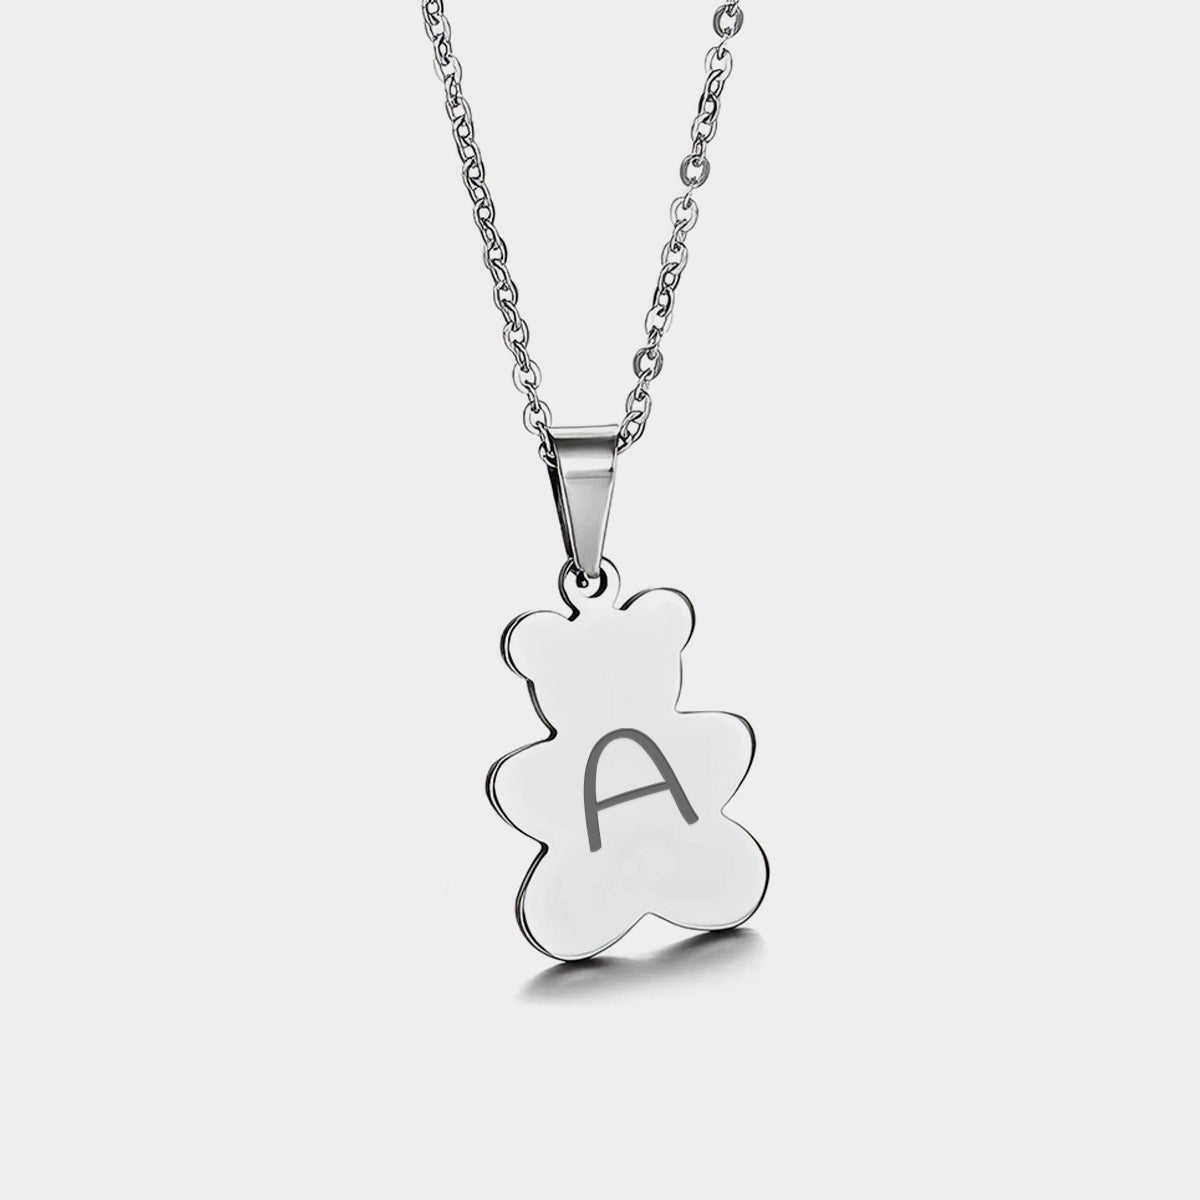 Personalized Teddy Bear Necklace with Initial